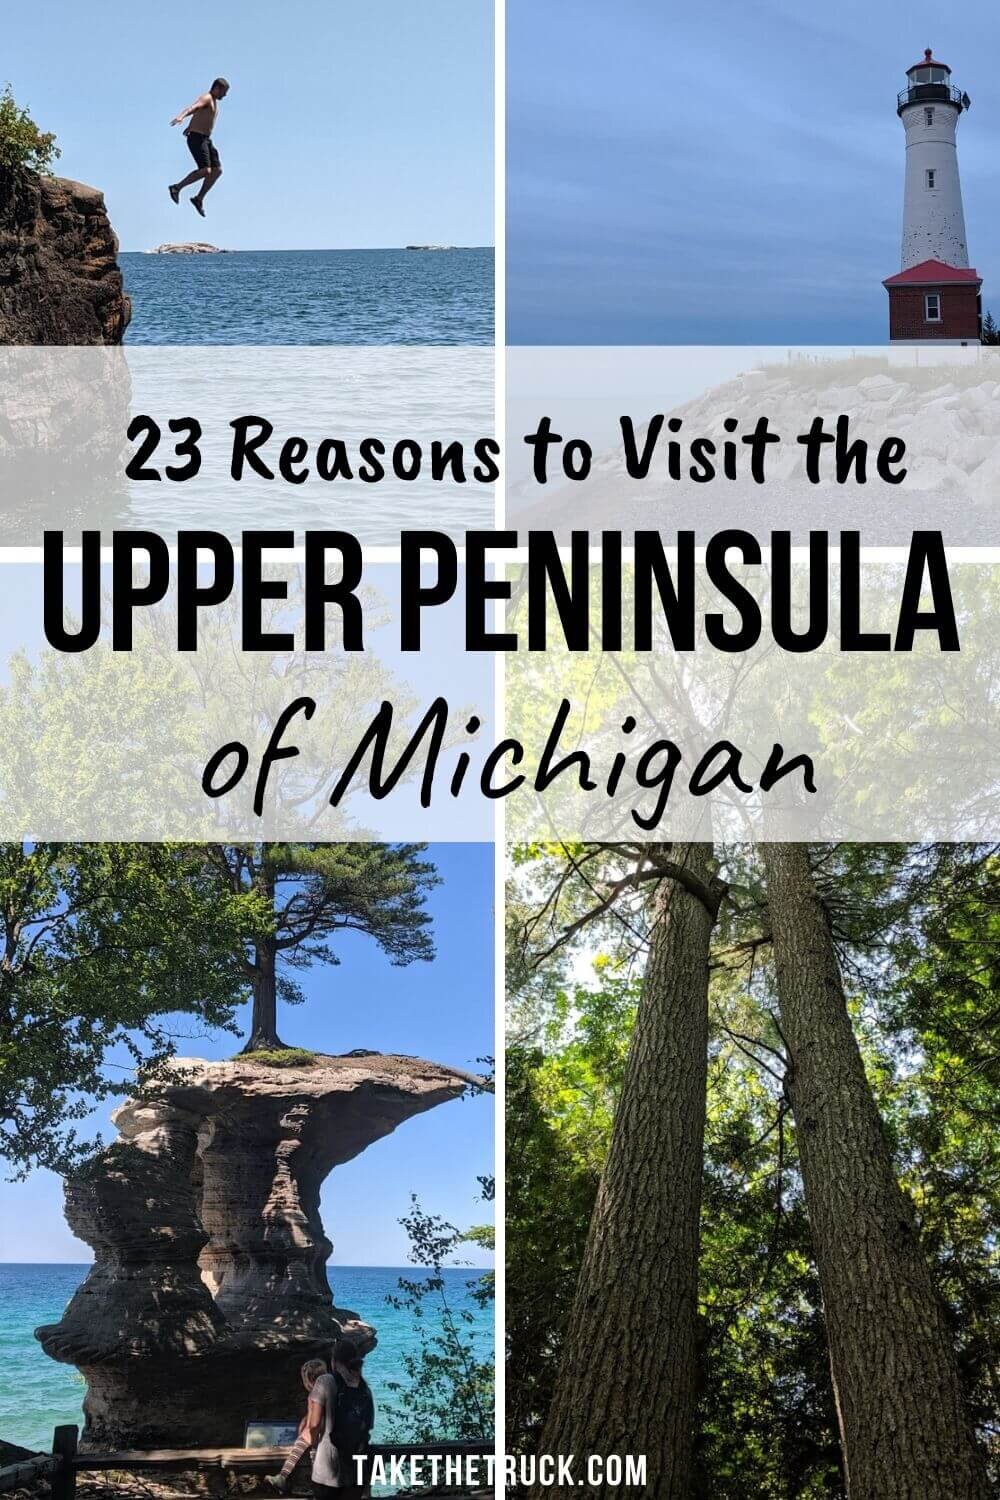 Plan your Upper Peninsula road trip or vacation with these 23 things to do in the U.P. of MIchigan- lighthouses, hiking, parks, forests, great lakes, attractions, off-roading -something for everyone!